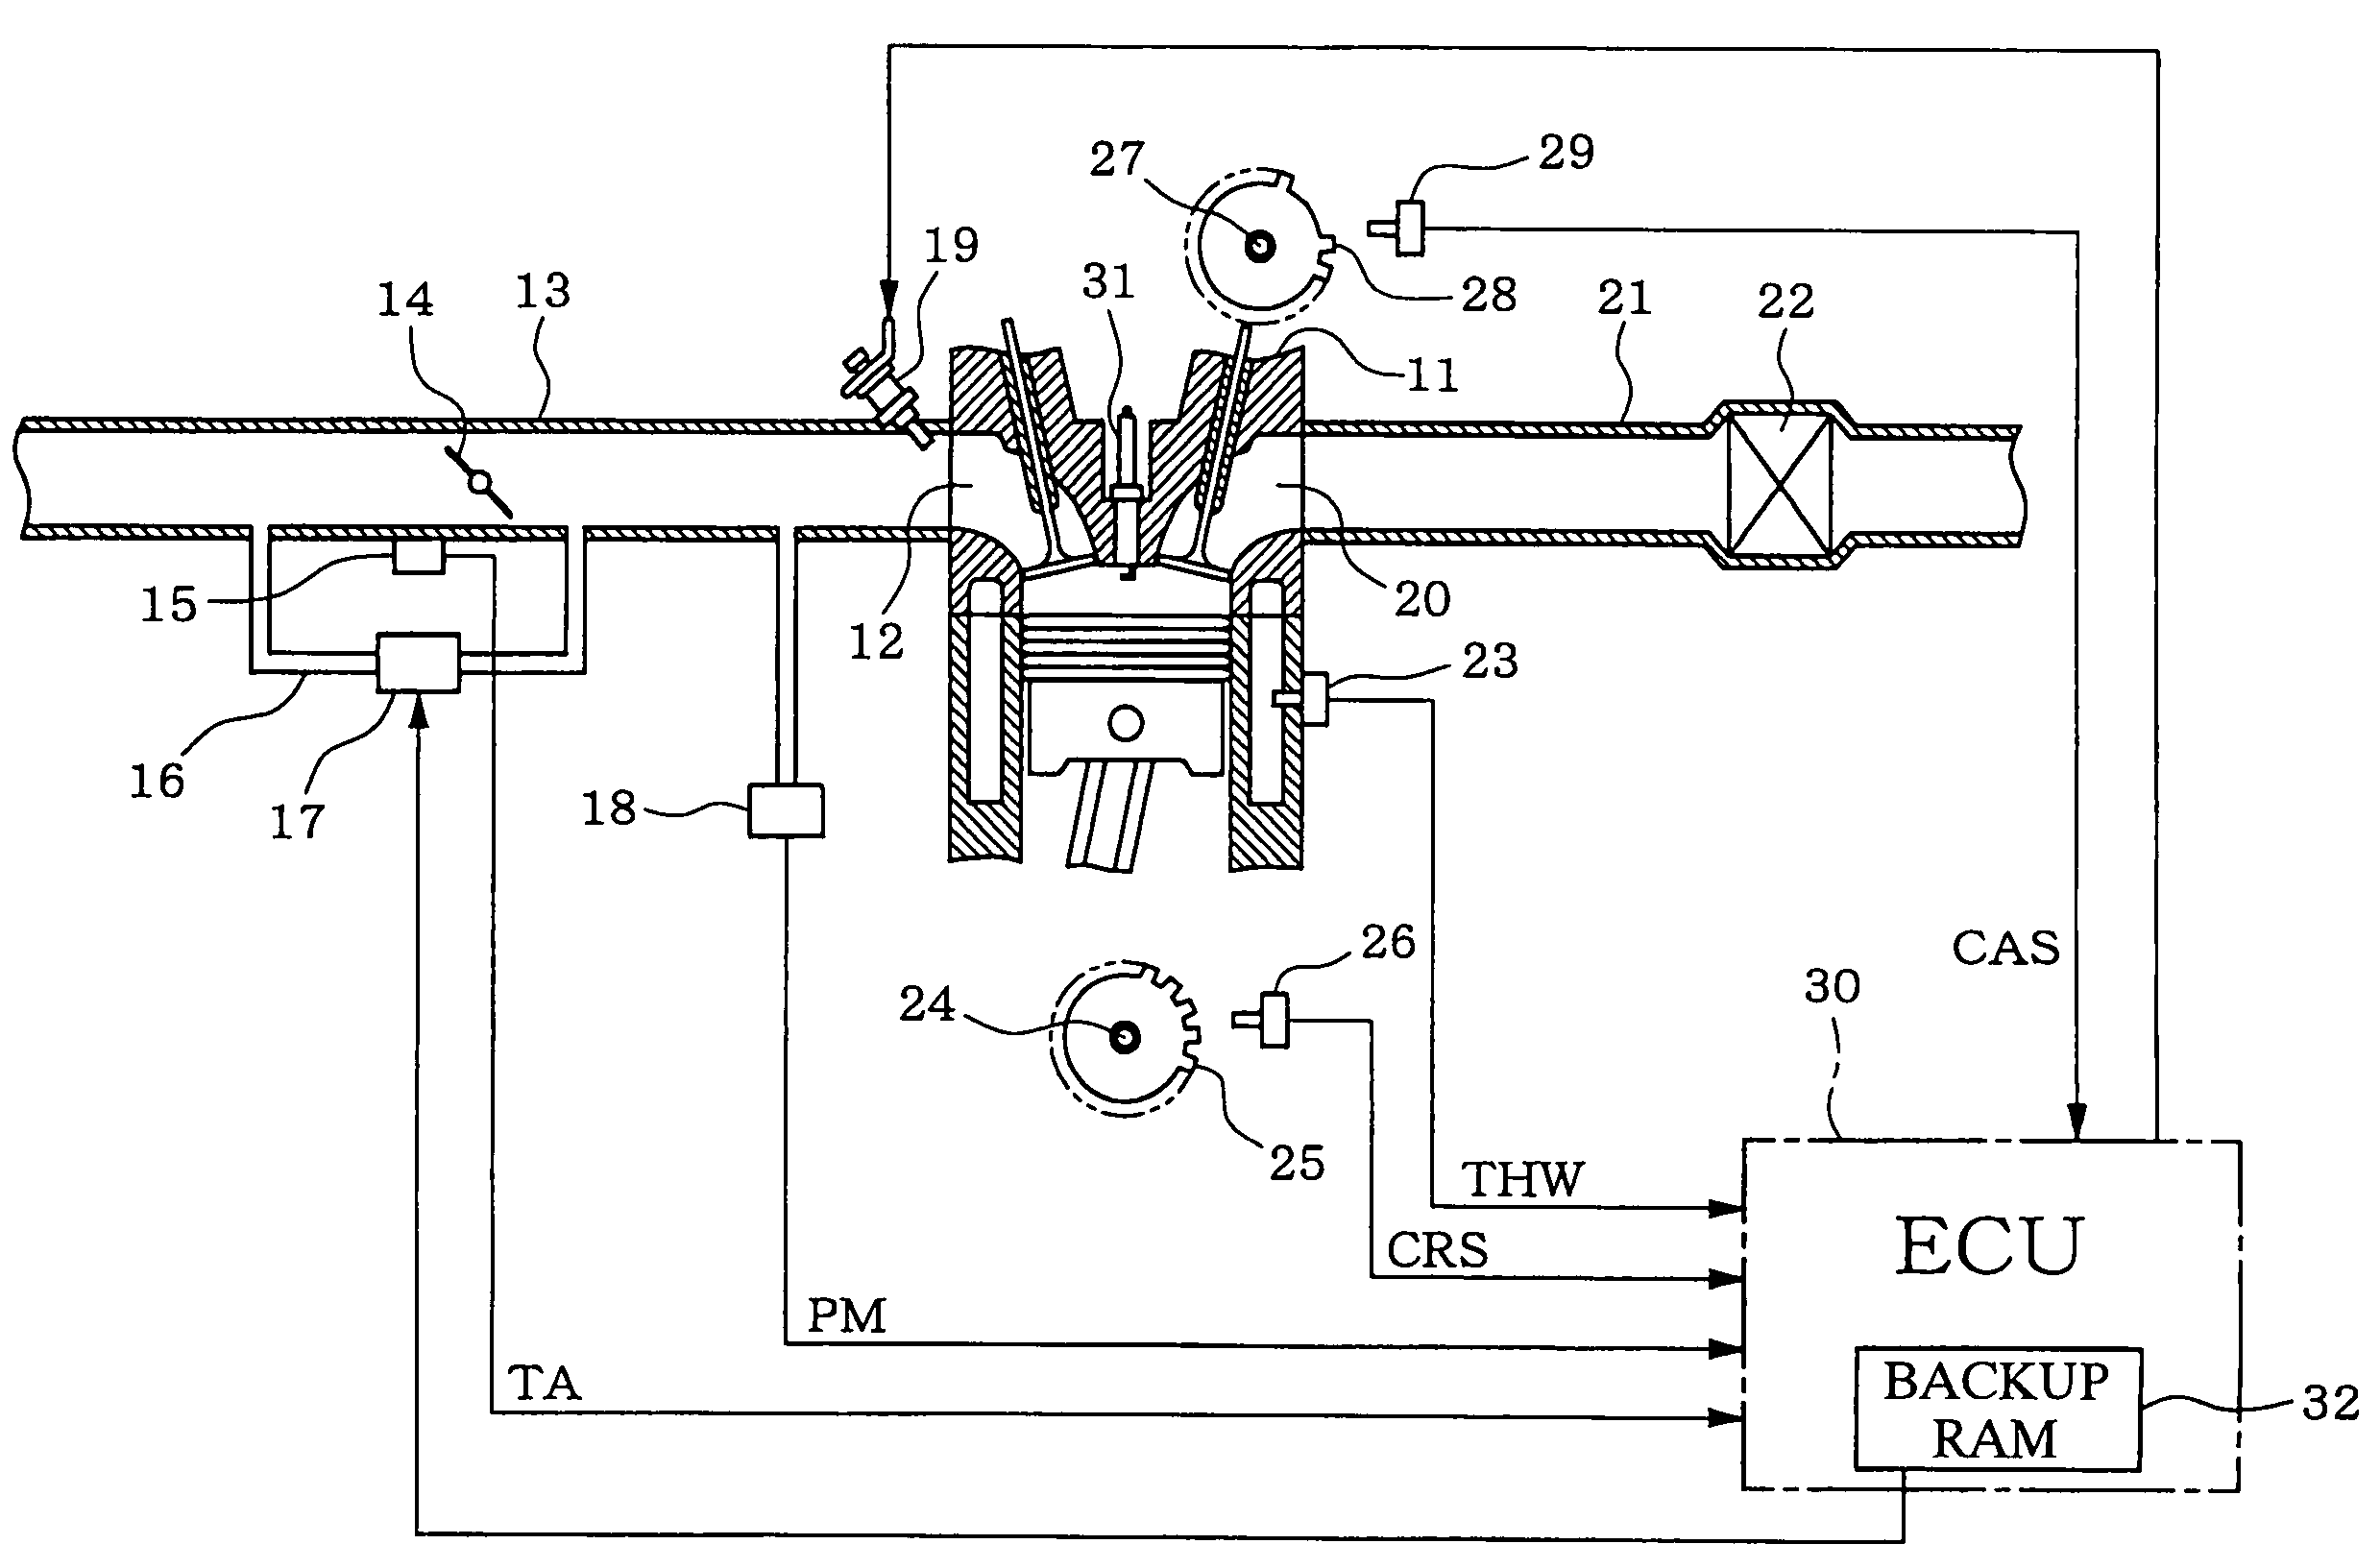 Engine starting and stopping control device